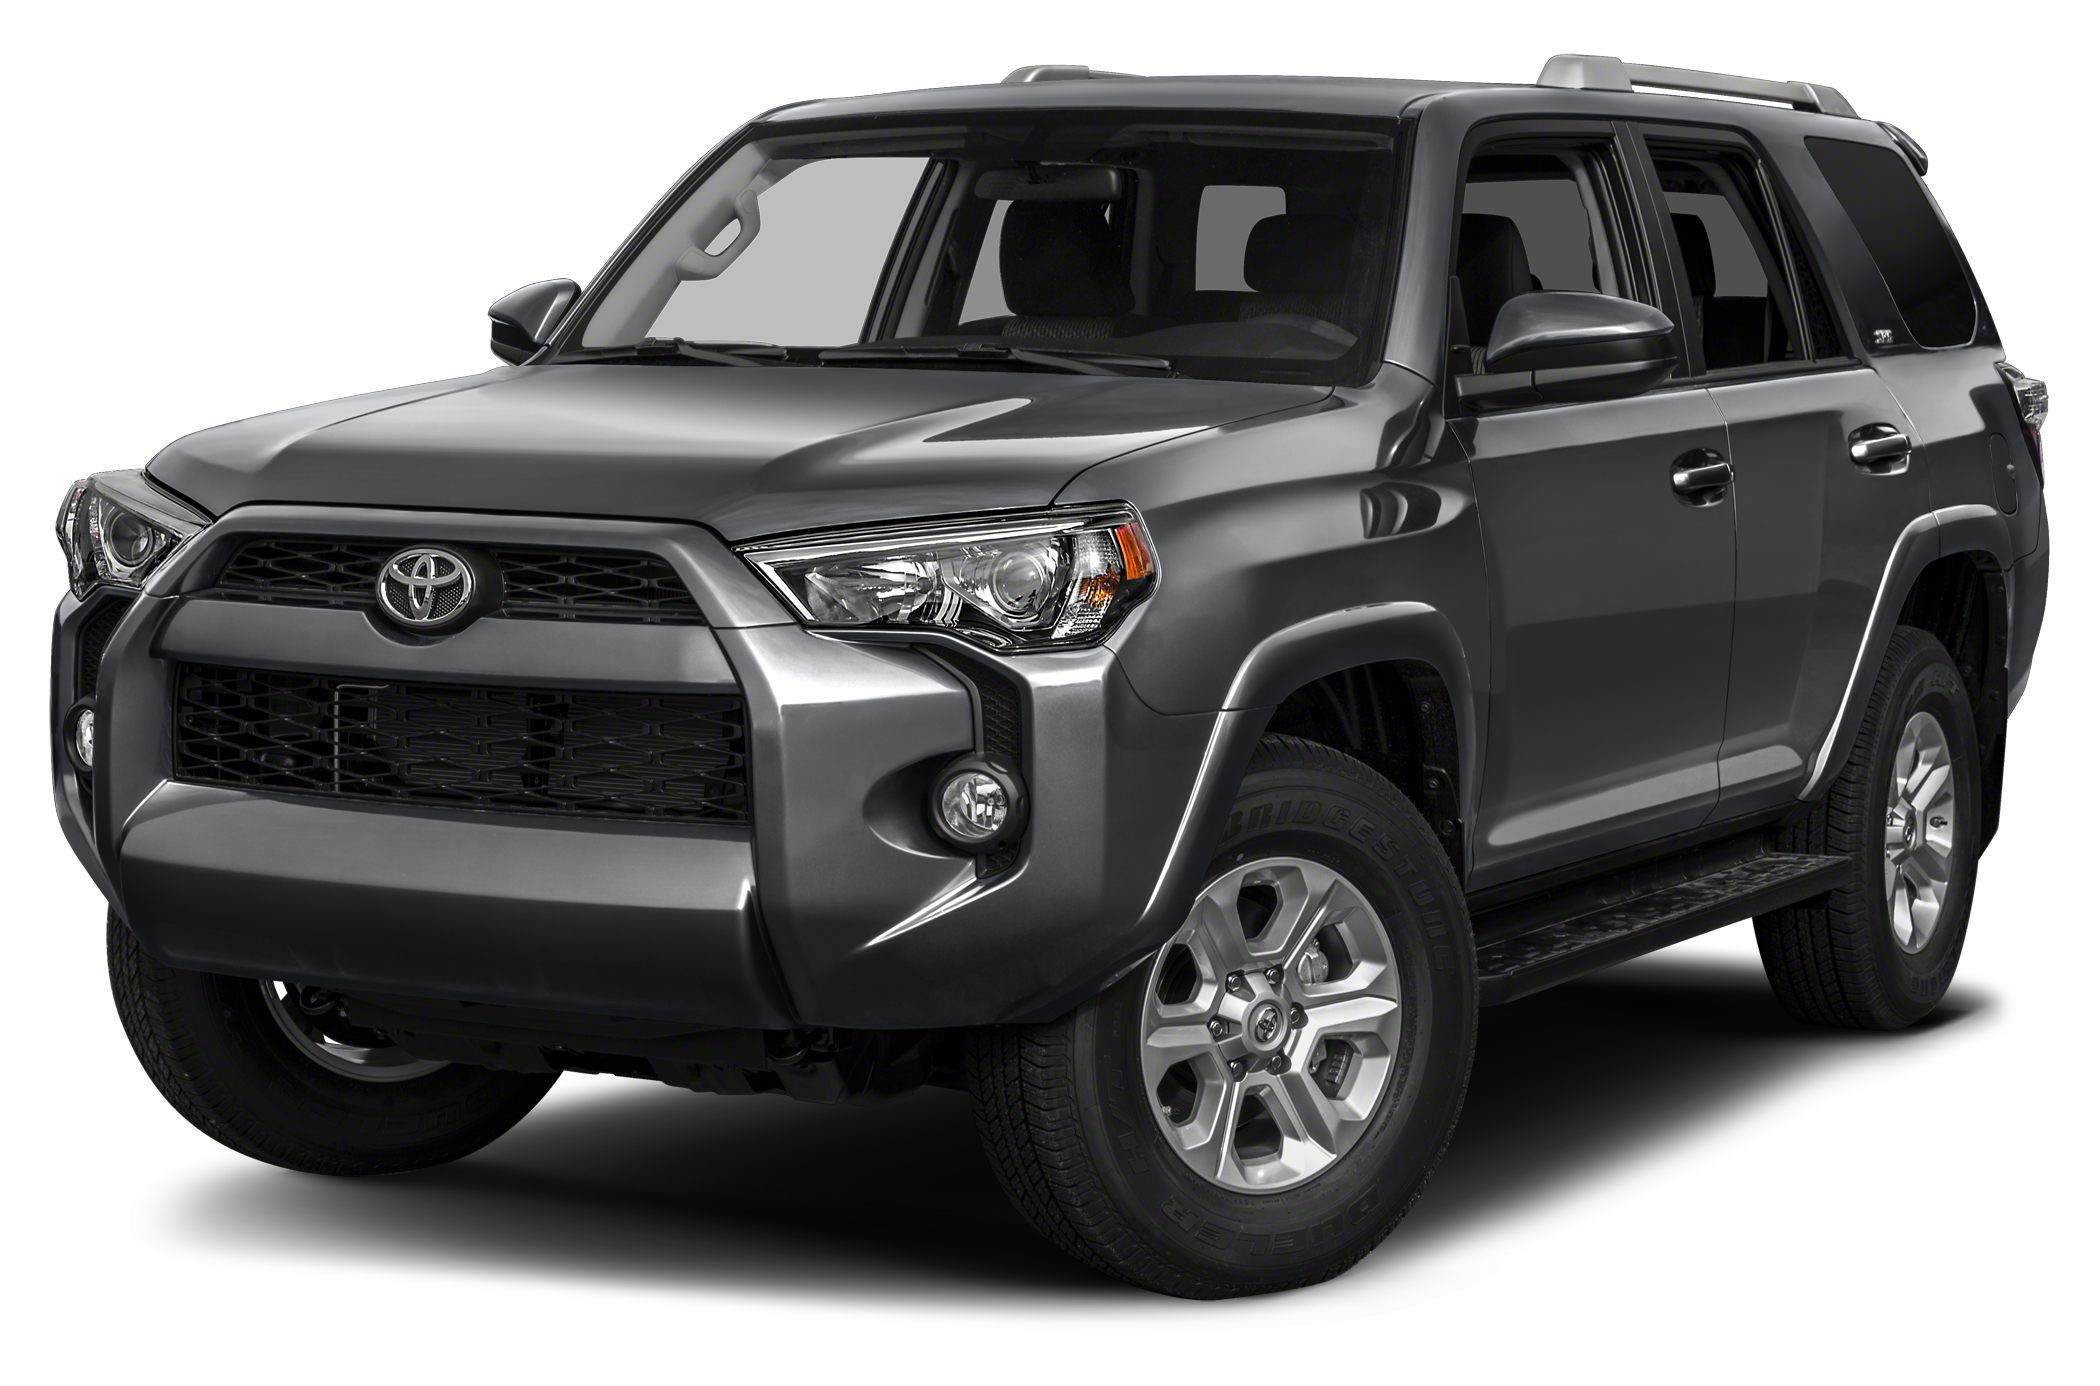 2014 Toyota 4Runner oem parts and accessories on sale